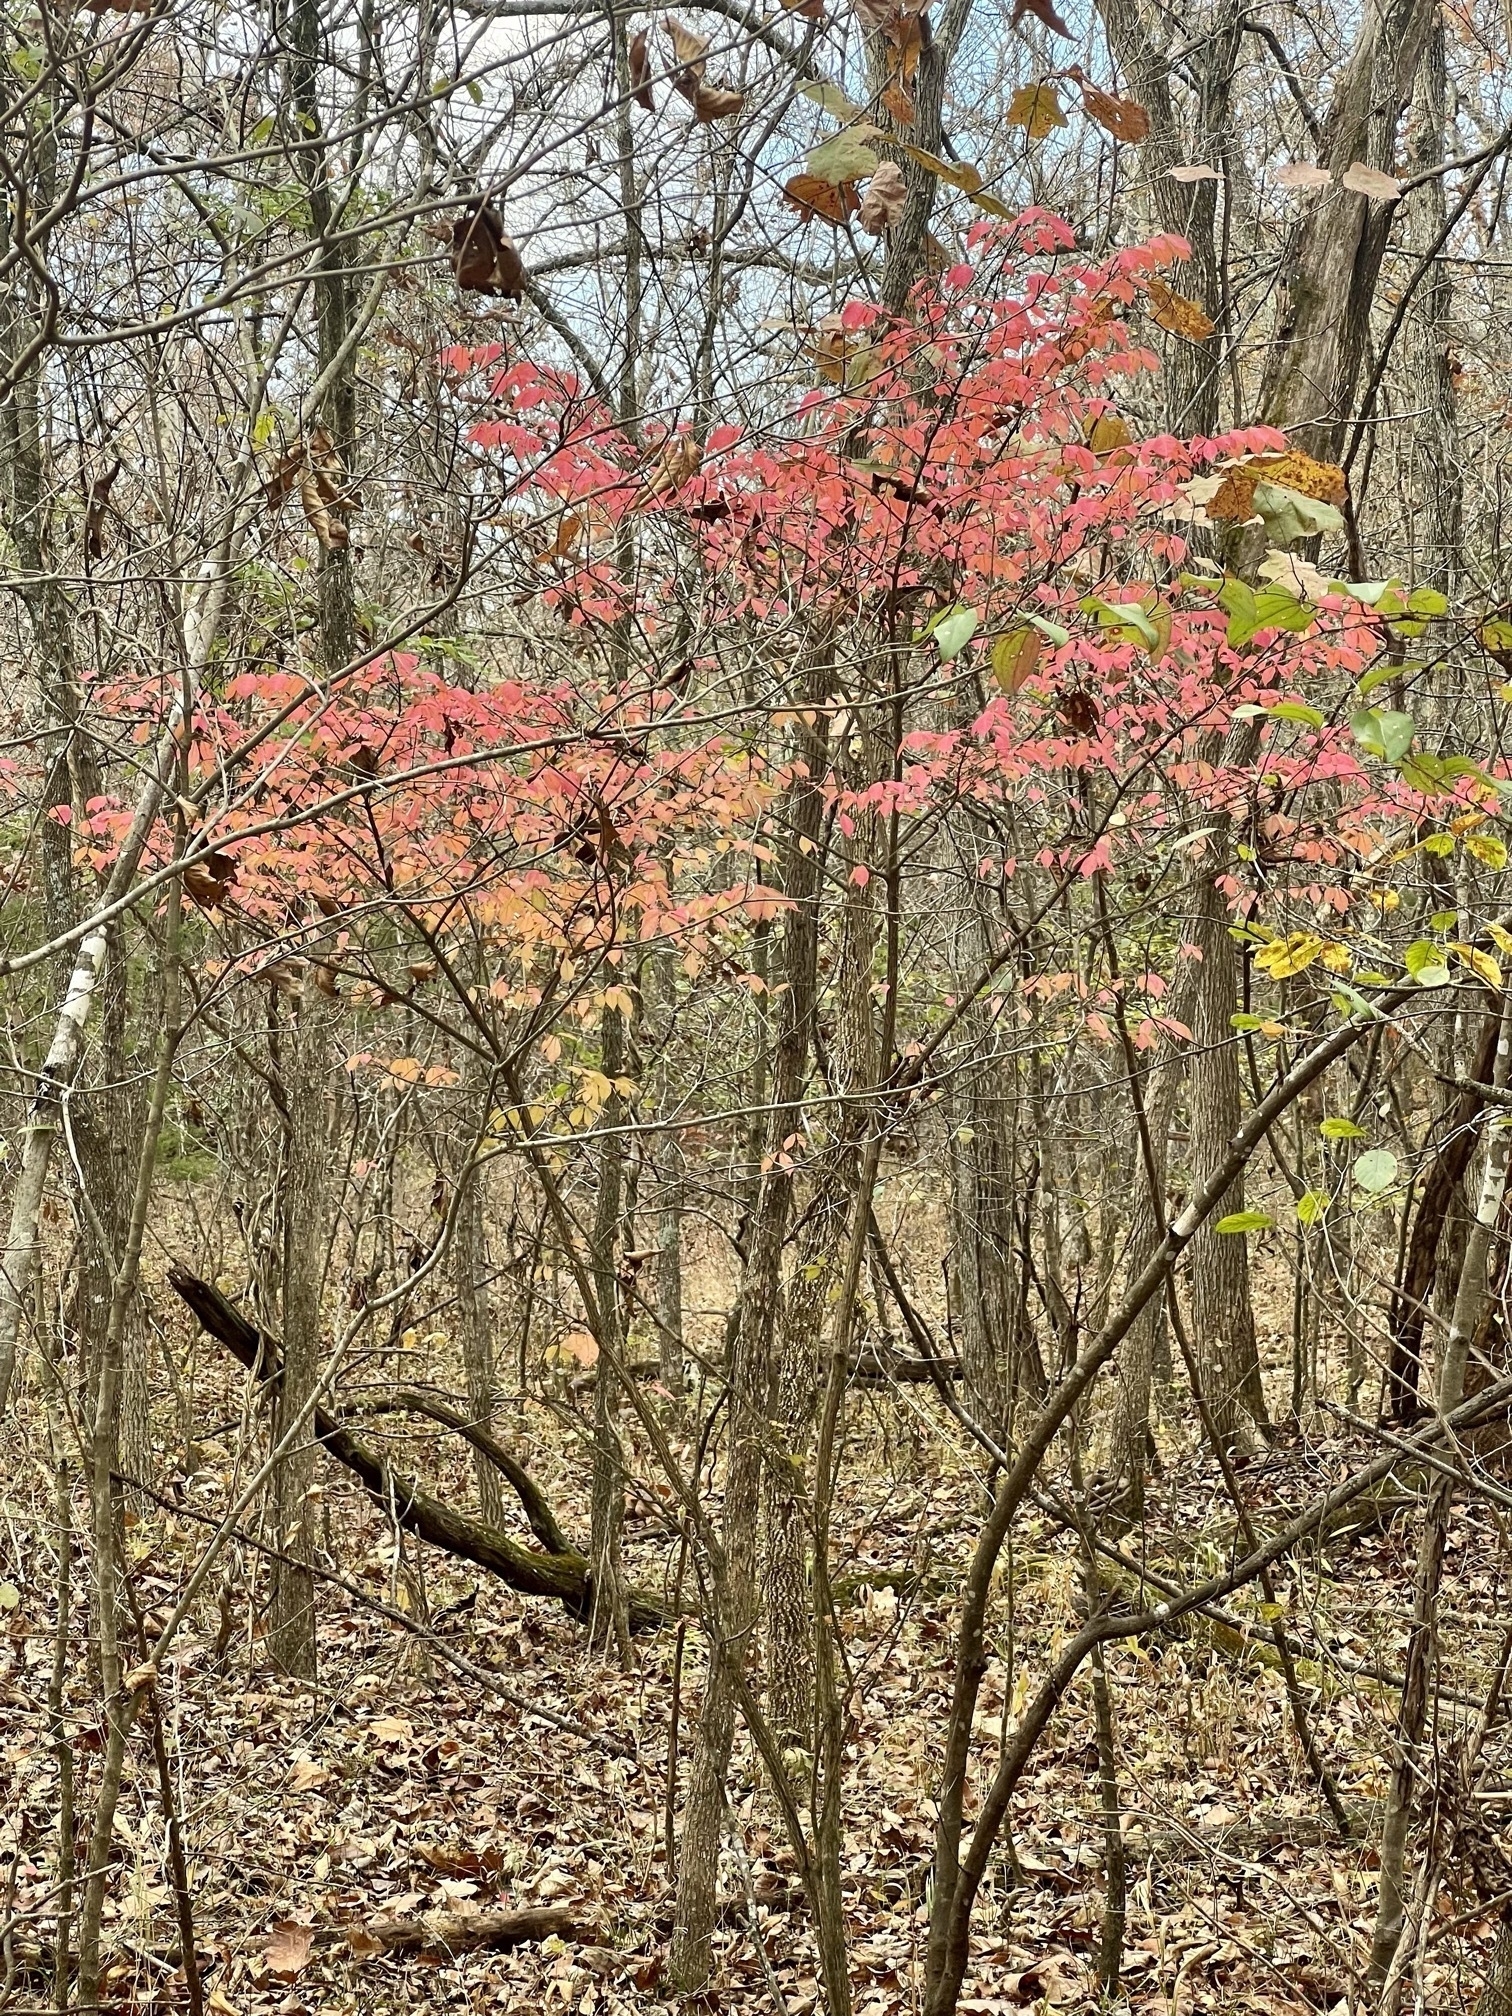 The fall colors of a burning bush in the forest. The small tree with leaves of pink, yellow and green, in a winter woodland of brown.